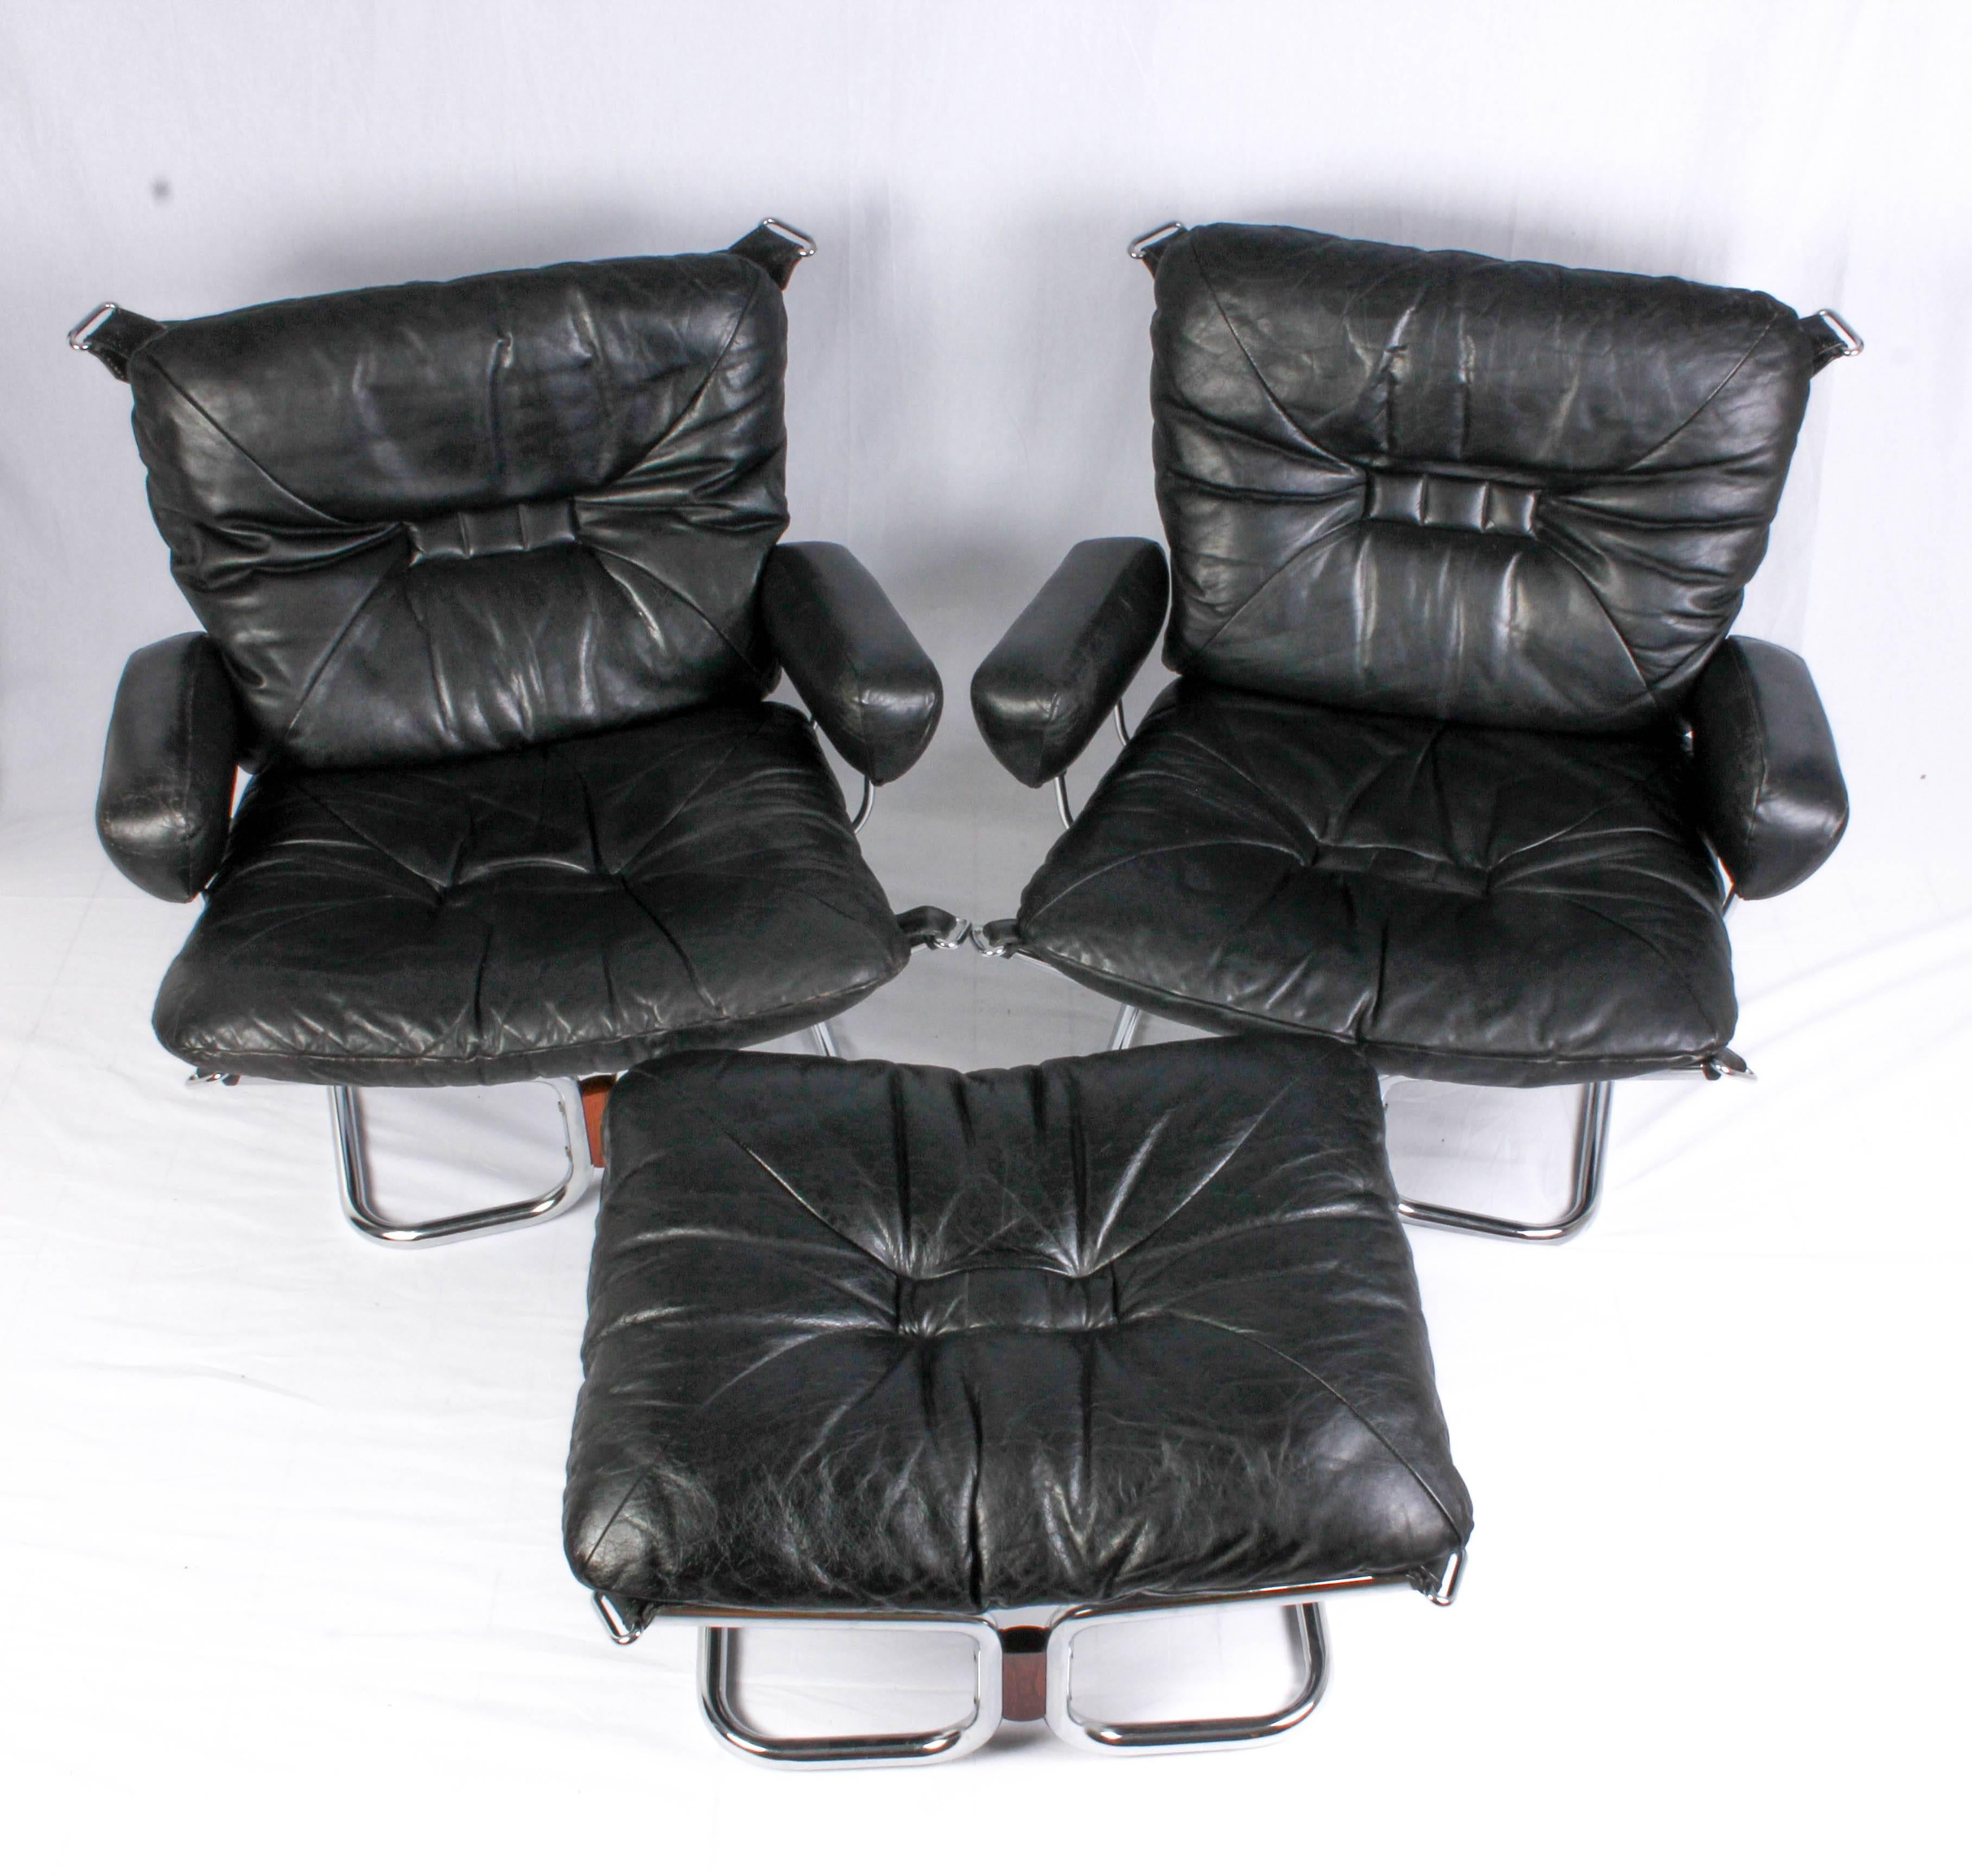 A pair of lounge chairs and a ottoman designed by Norwegian designer Ingmar Relling. The chairs and ottoman are made of a chrome frame, leather cushions. They are all in excellent vintage condition with minor signs of usage. The armrest has some